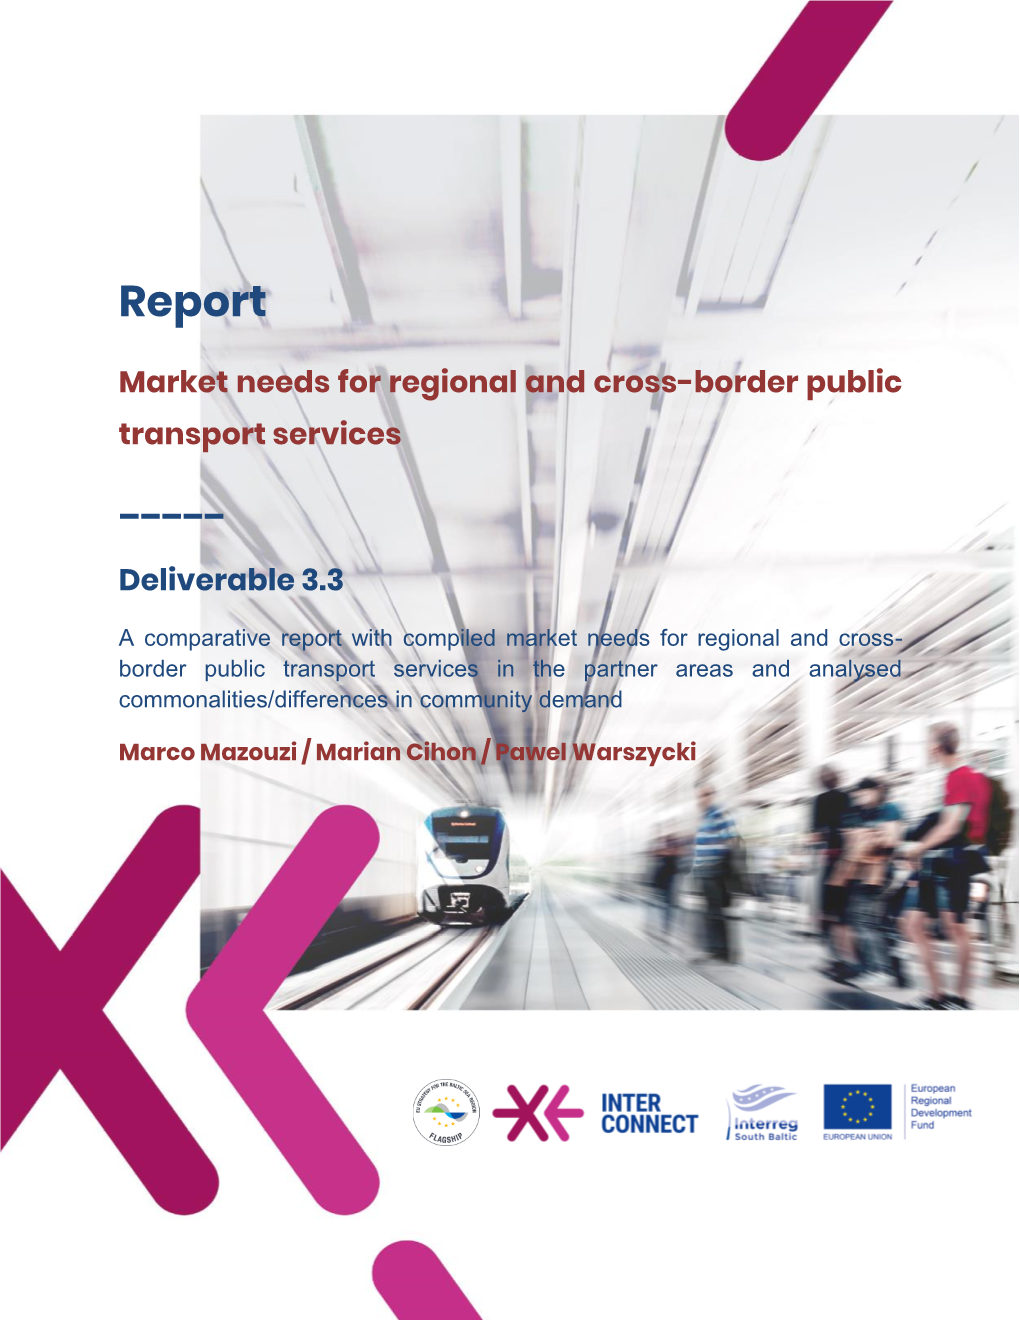 Report on Market Needs for Regional and Cross- Border Public Transport Services